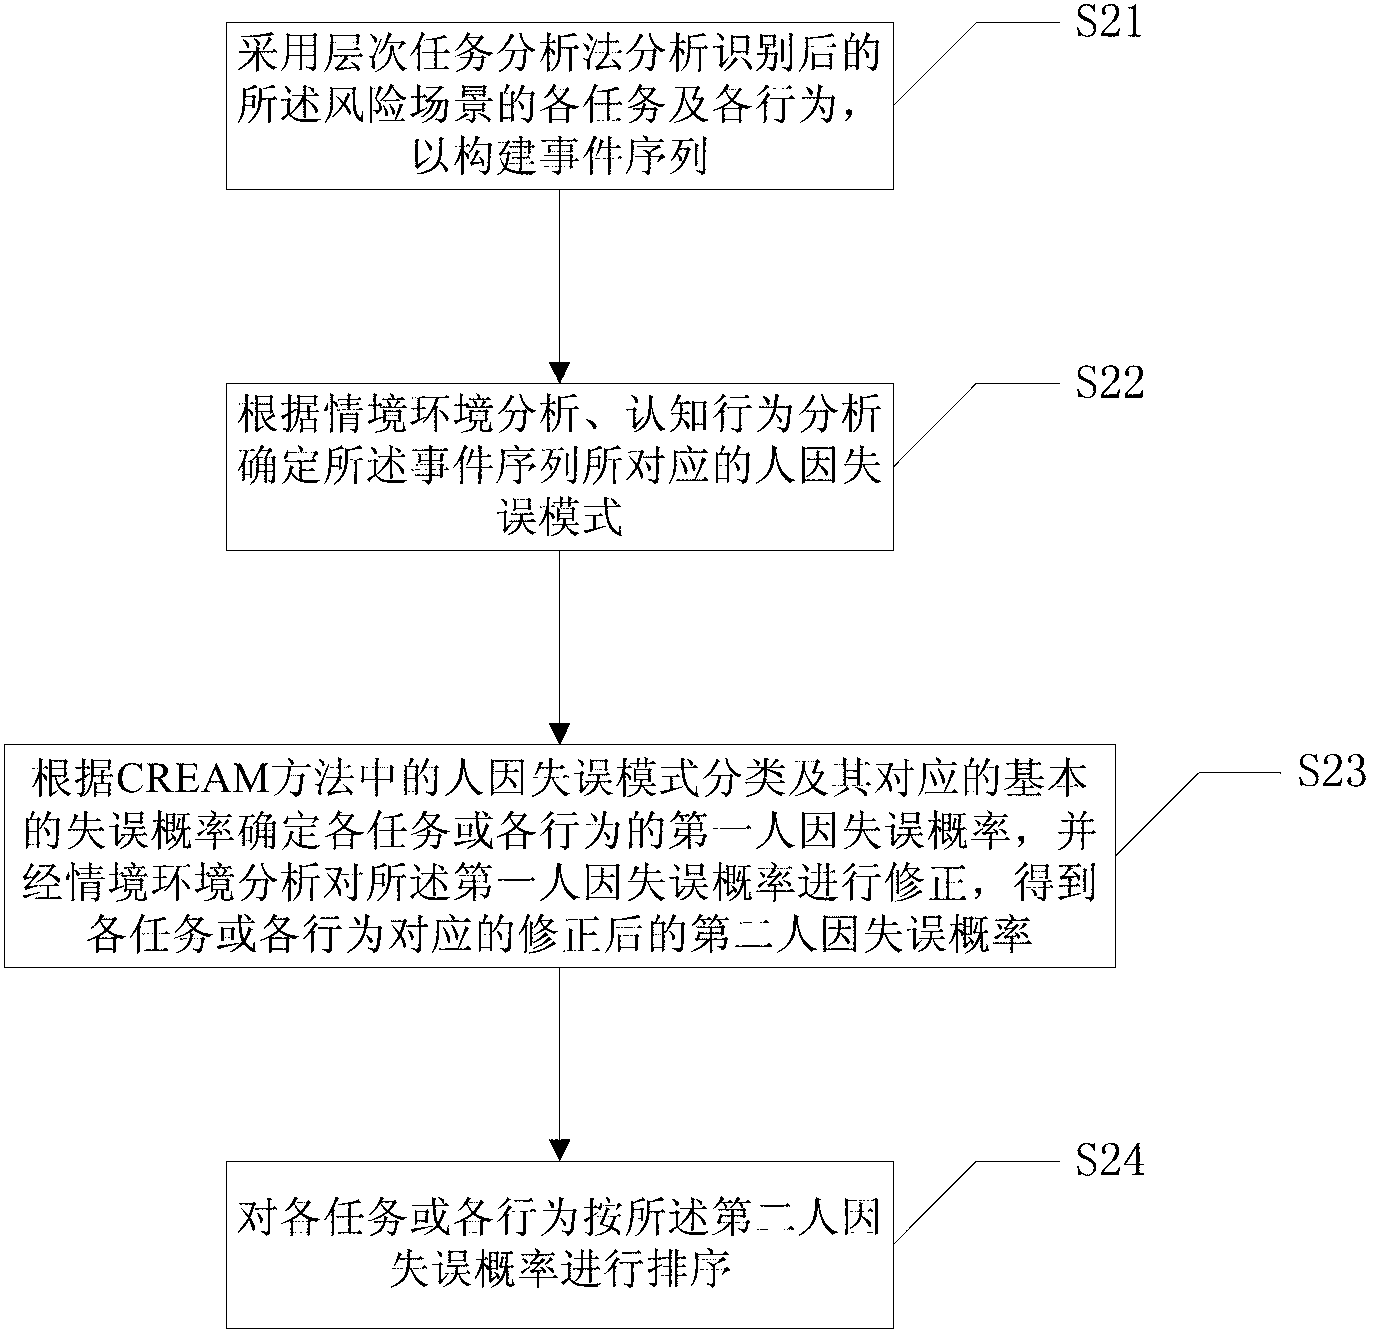 Method and system for detecting man-machine interfaces